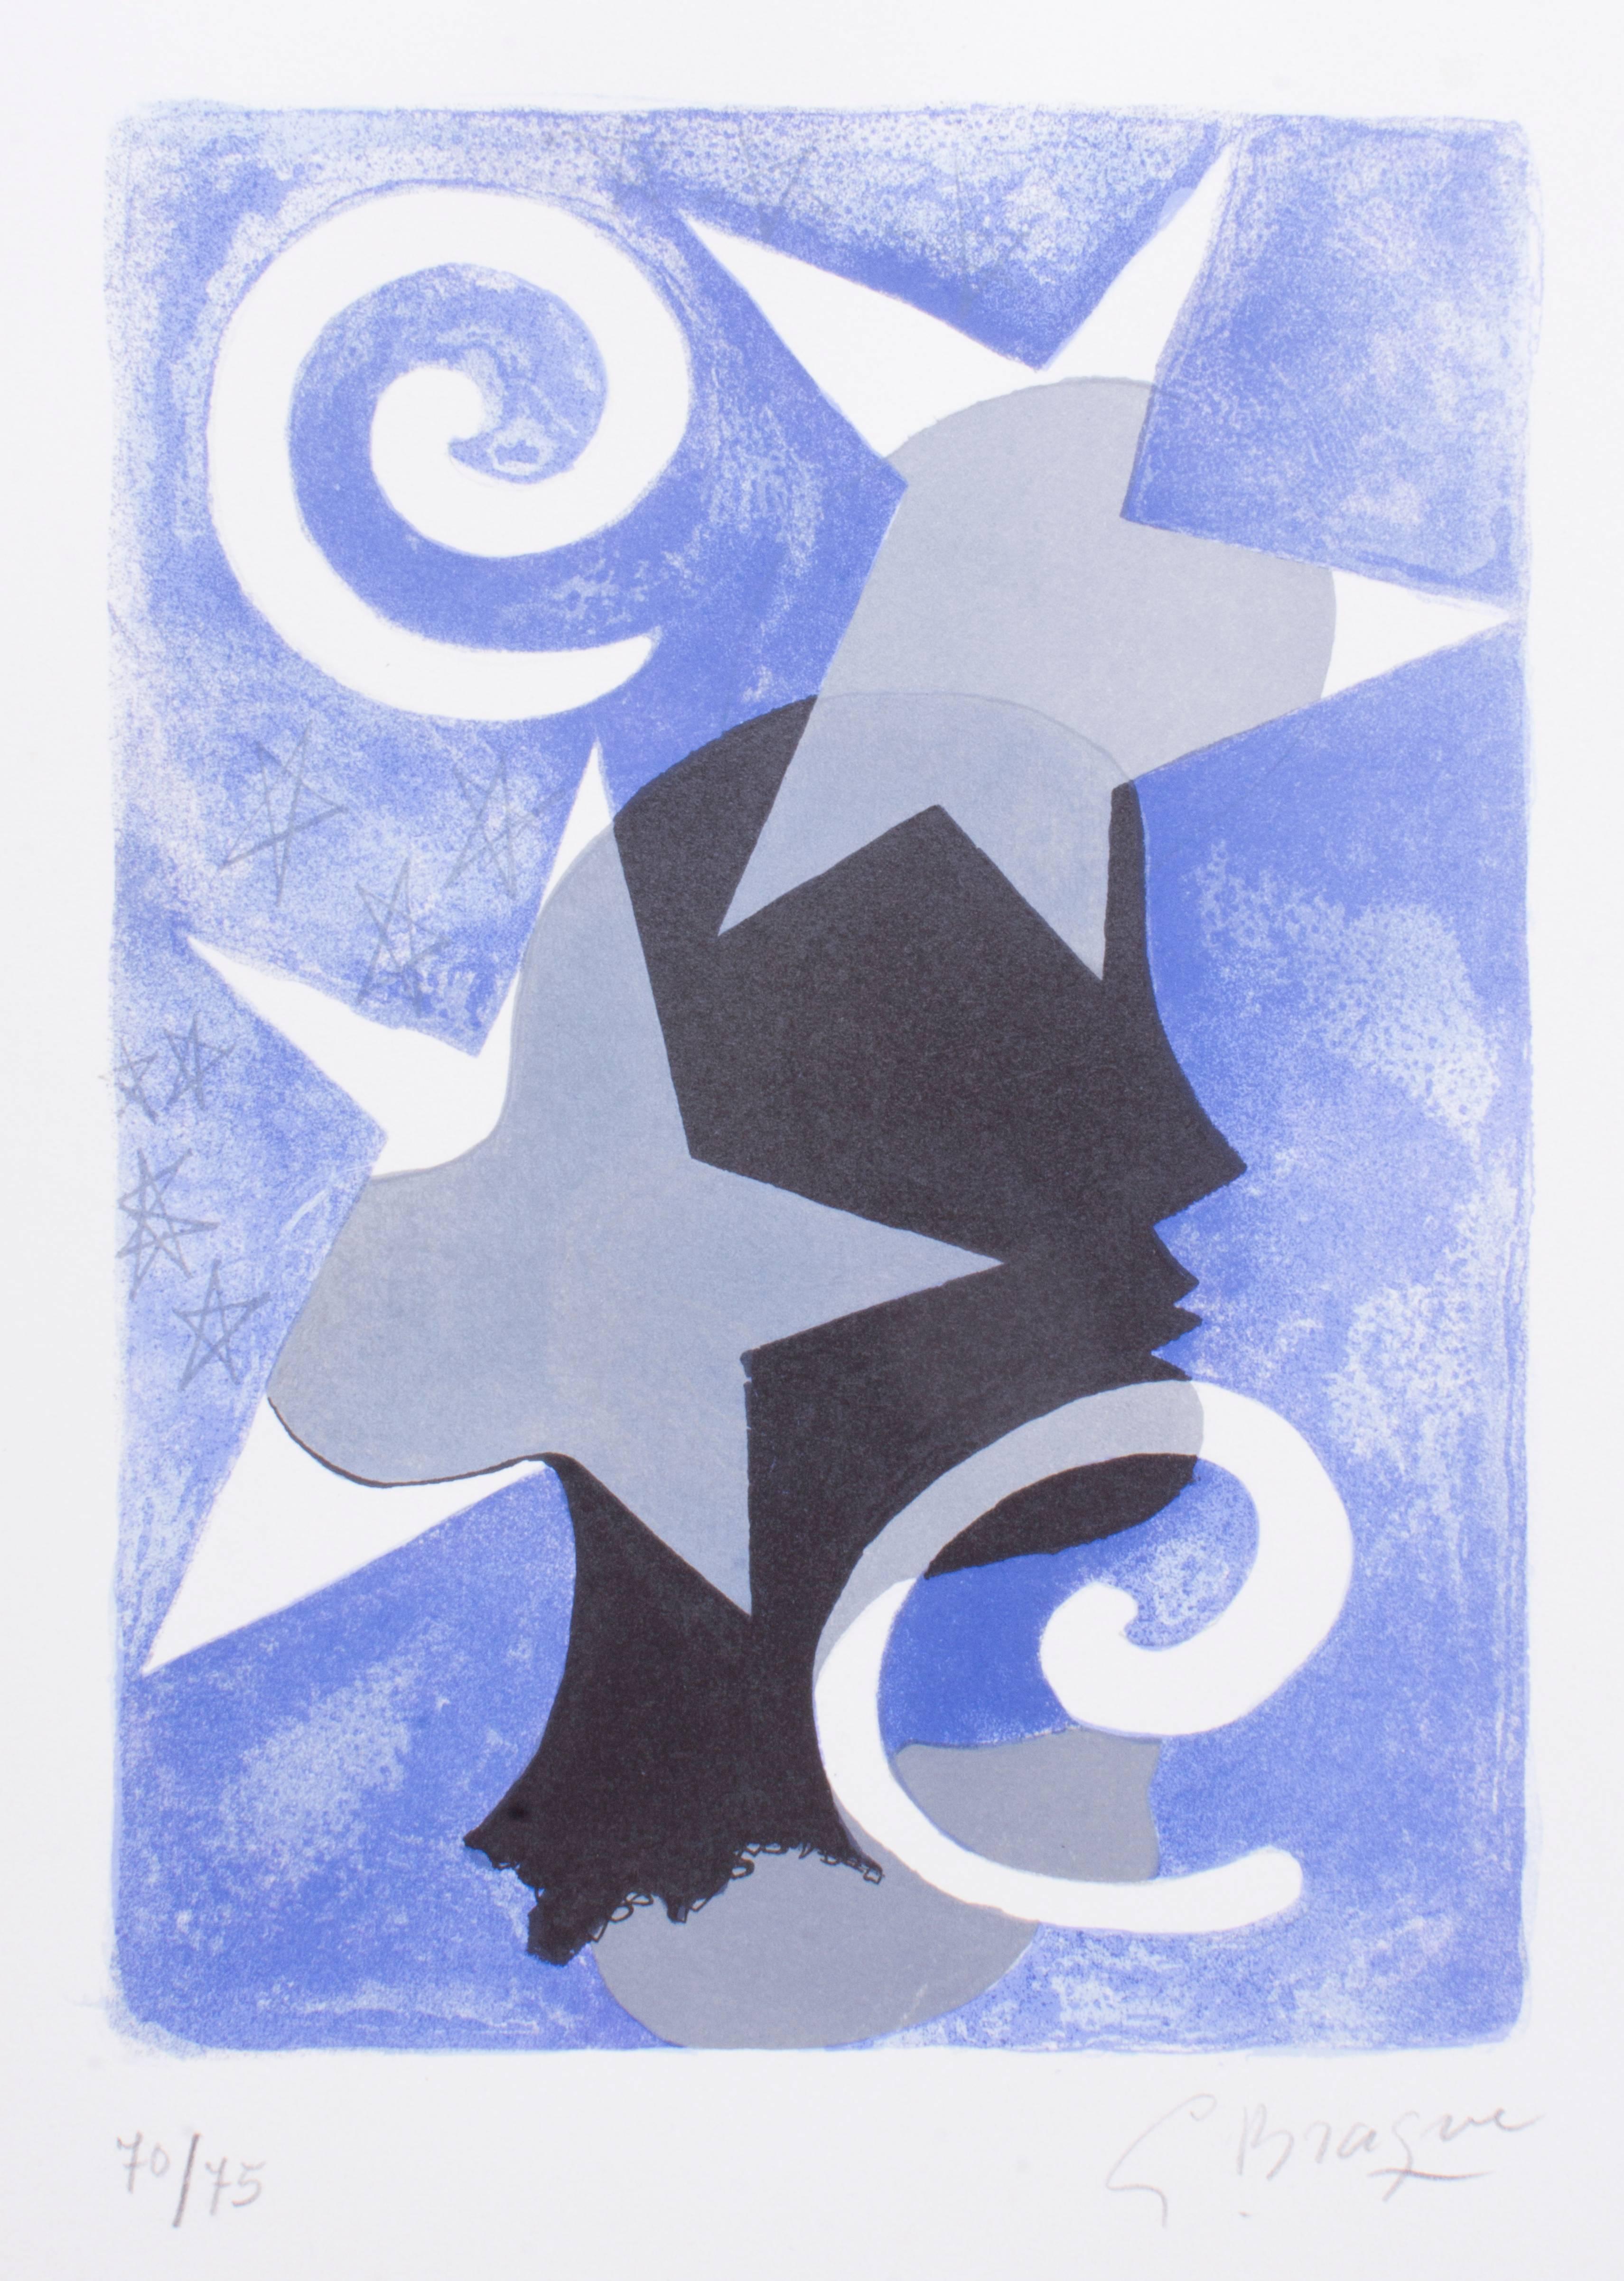 Georges Braque Abstract Print - Profile of "Lettre Amoureuse"